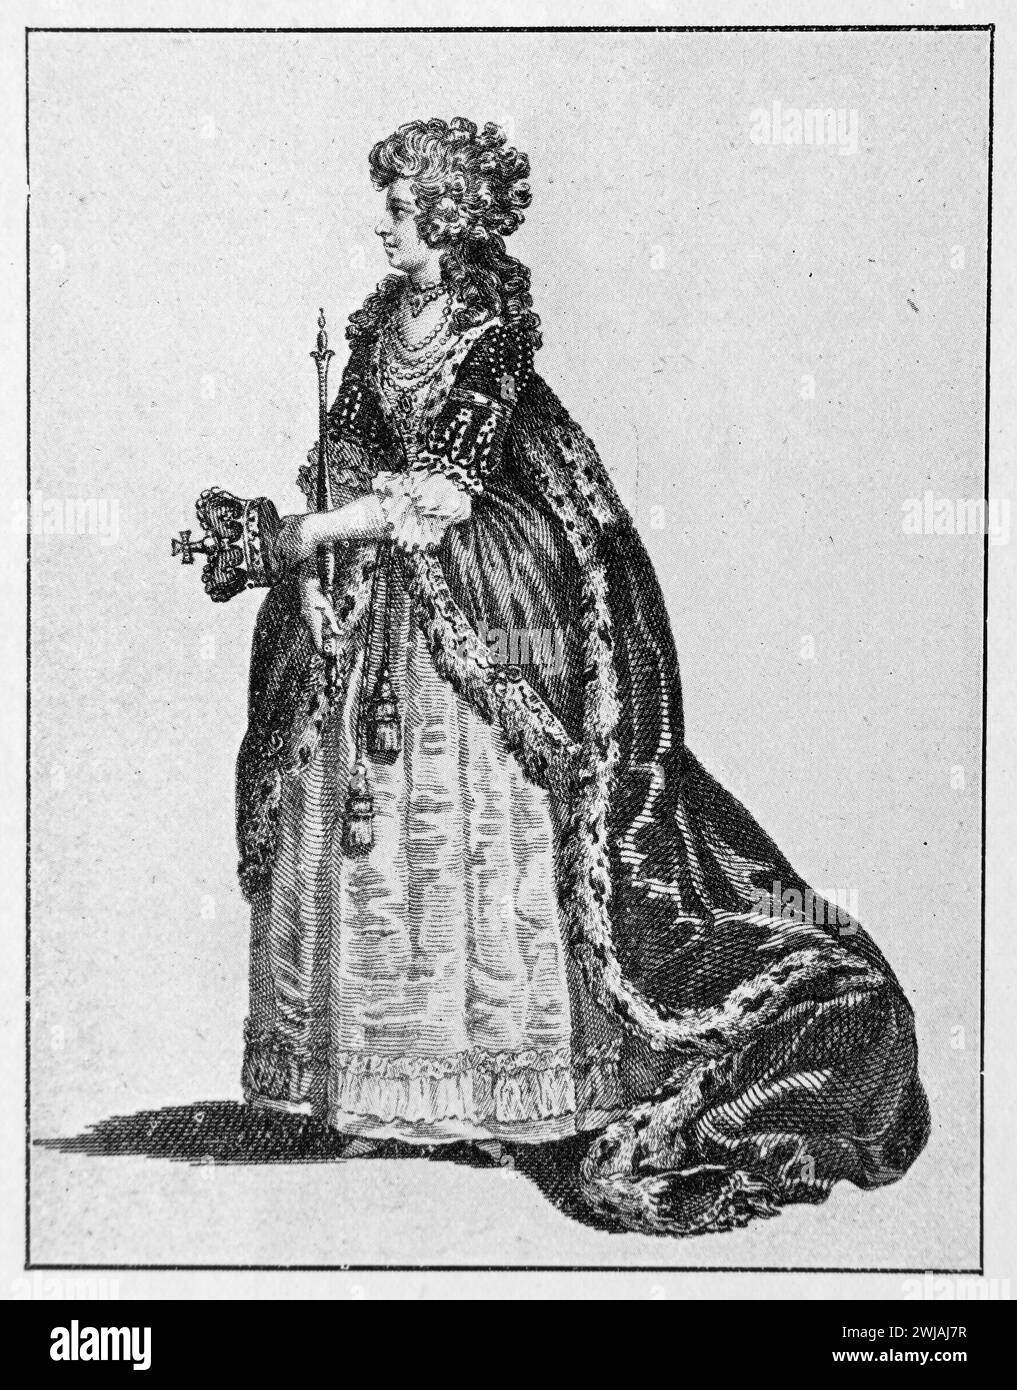 Charlotte of Mecklenburg-Strelitz (Sophia Charlotte; 19 May 1744 - 17 November 1818) wearing her Coronation Robes. She was Queen of Great Britain and Ireland as the wife of King George III. Engraving by Charles Turner Warren. Black and White Illustration from the Connoisseur, an Illustrated Magazine for Collectors Voll 3 (May-Aug 1902) published in London. Stock Photo